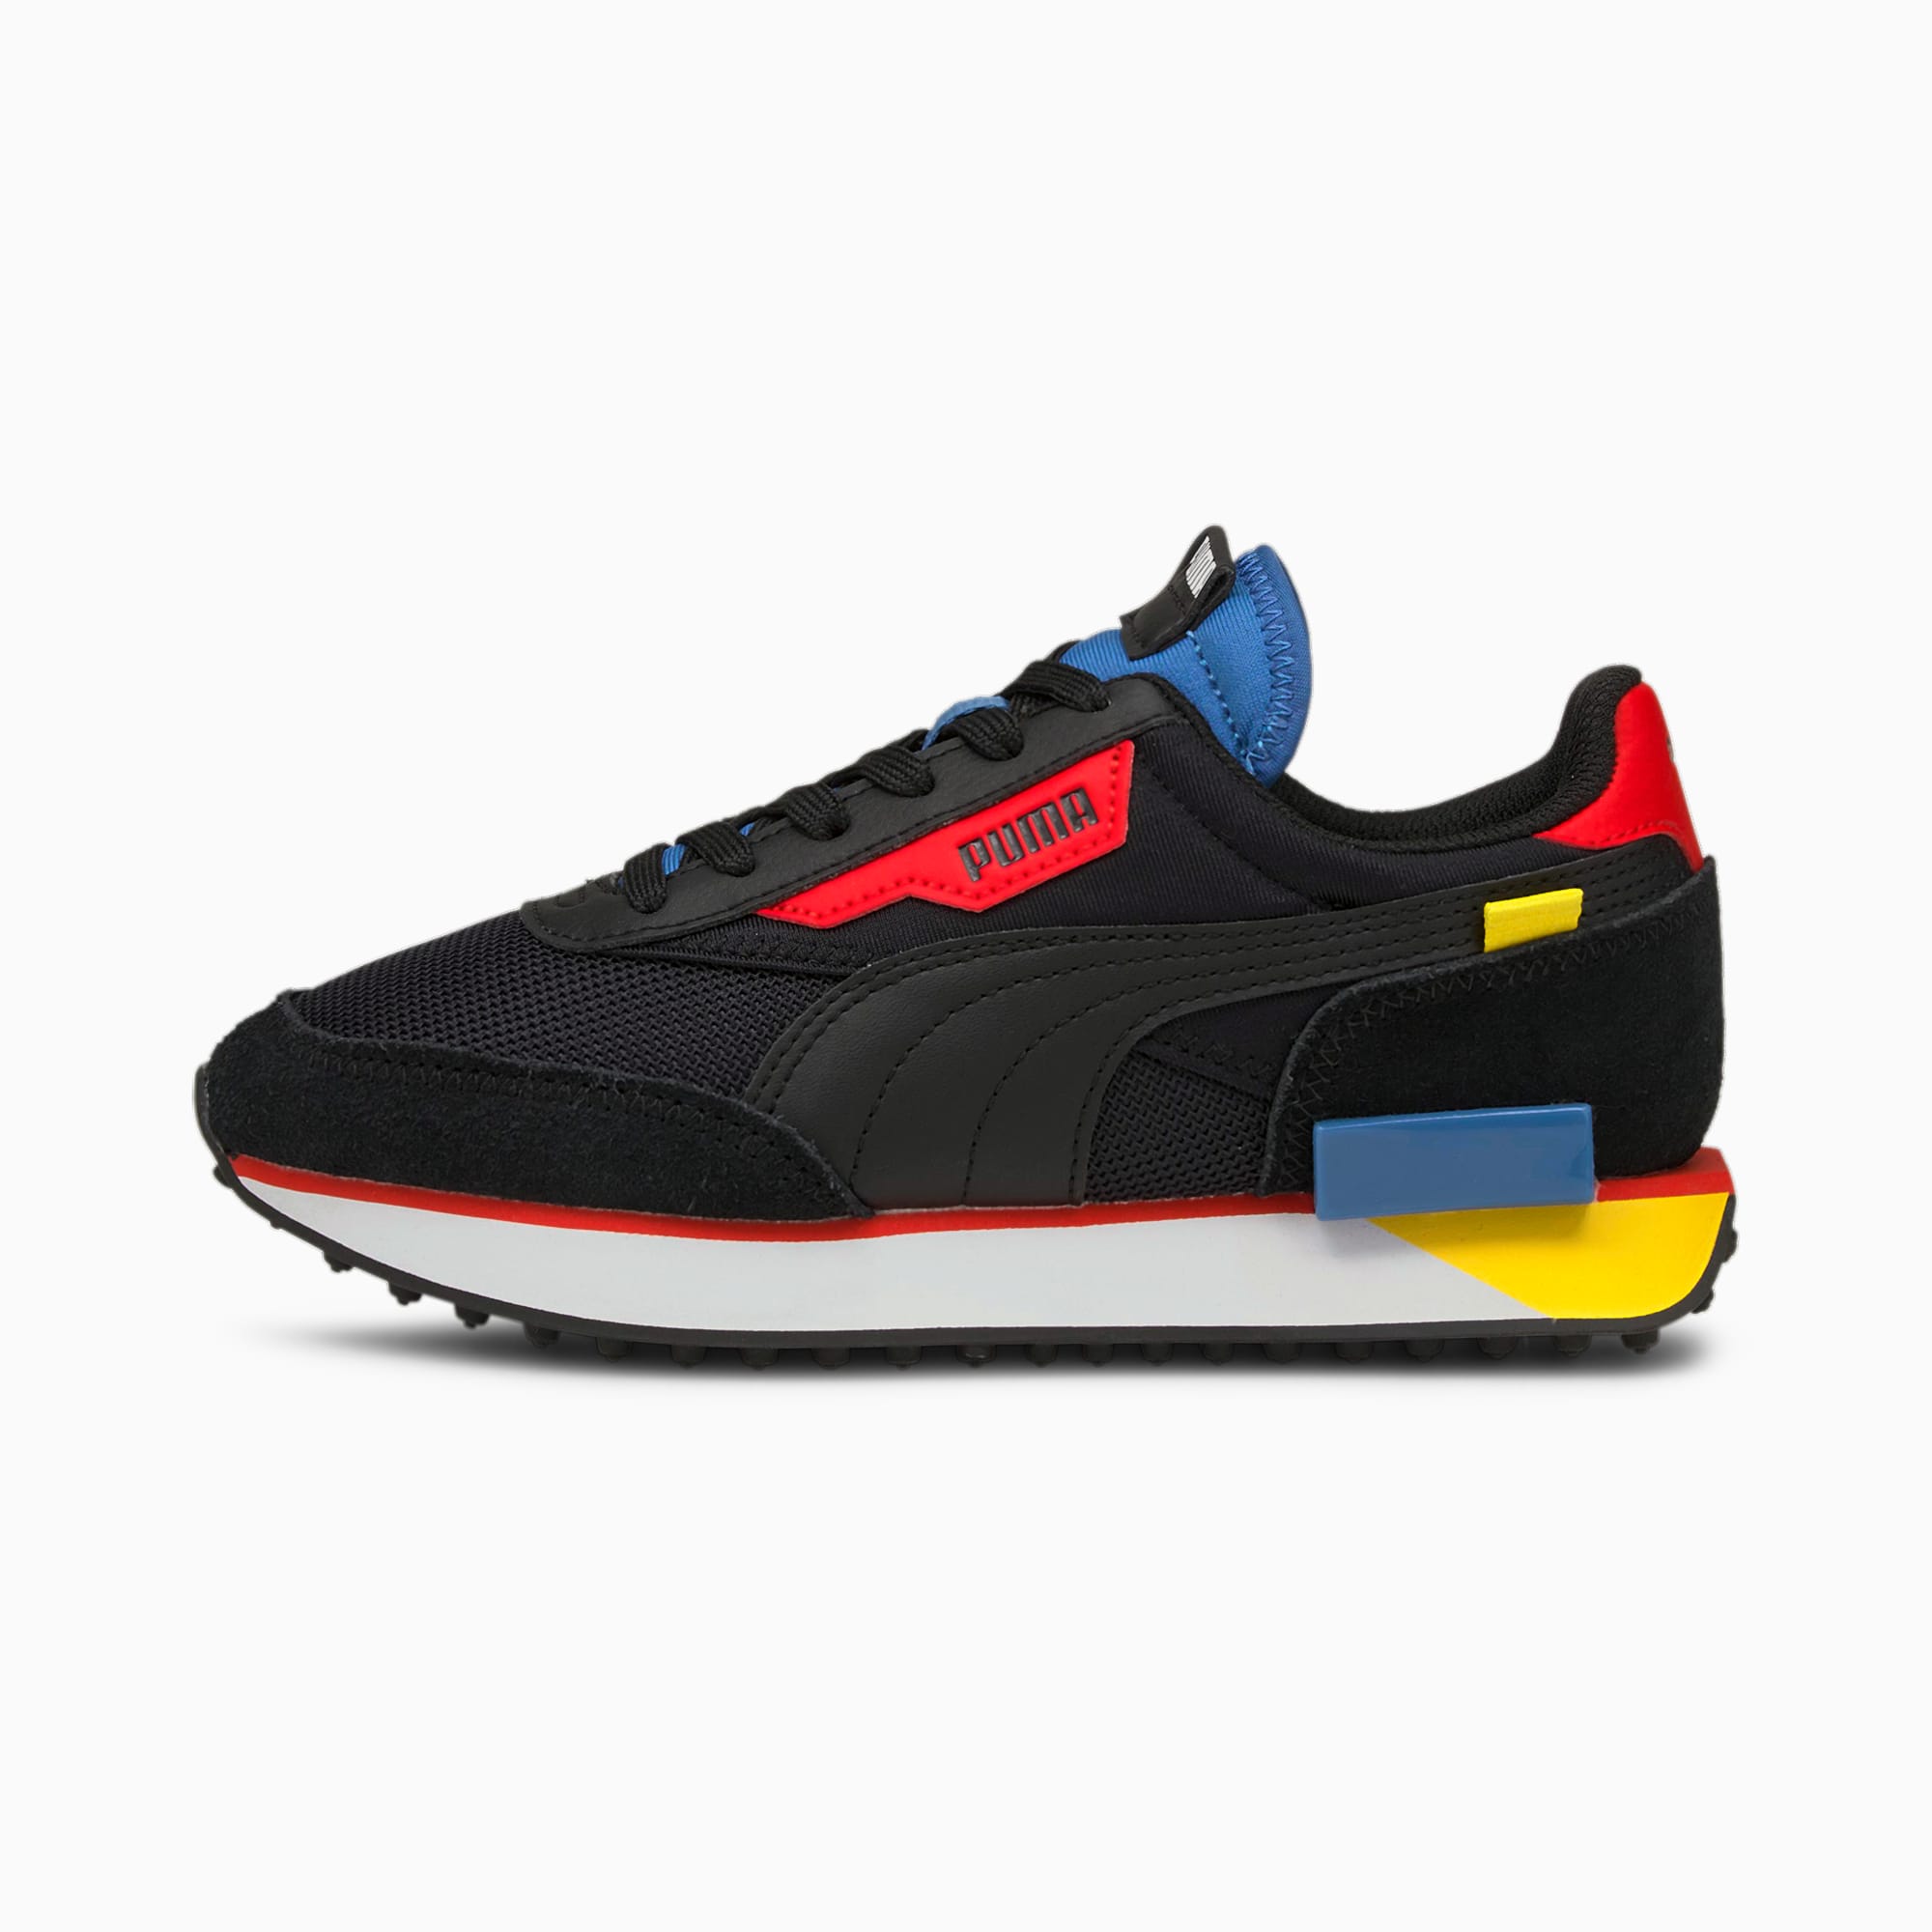 Future Rider Neon Play Youth Shoes | PUMA